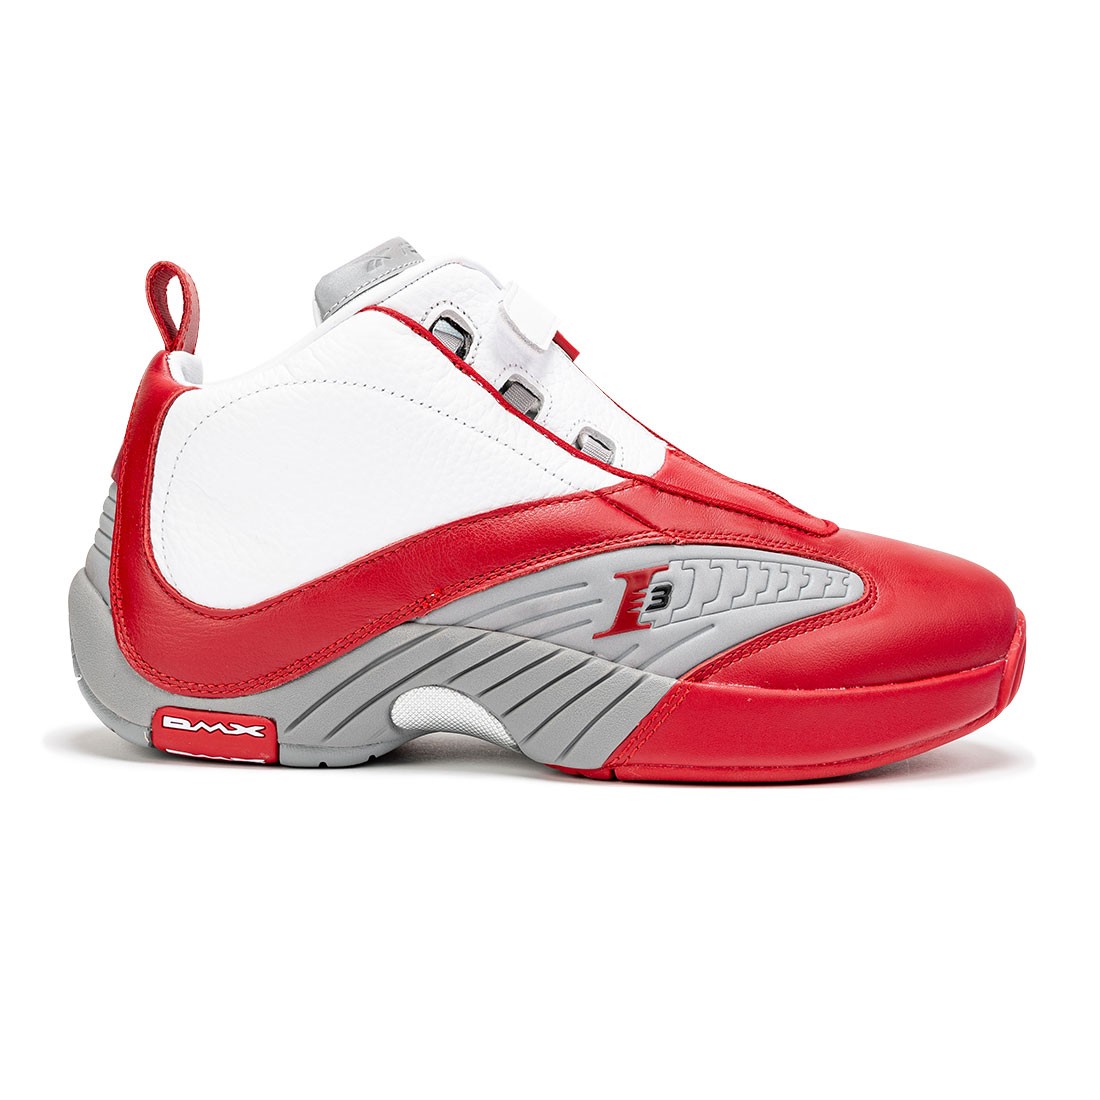 Reebok Men Answer IV (red / flash red / white / mgh solid grey)